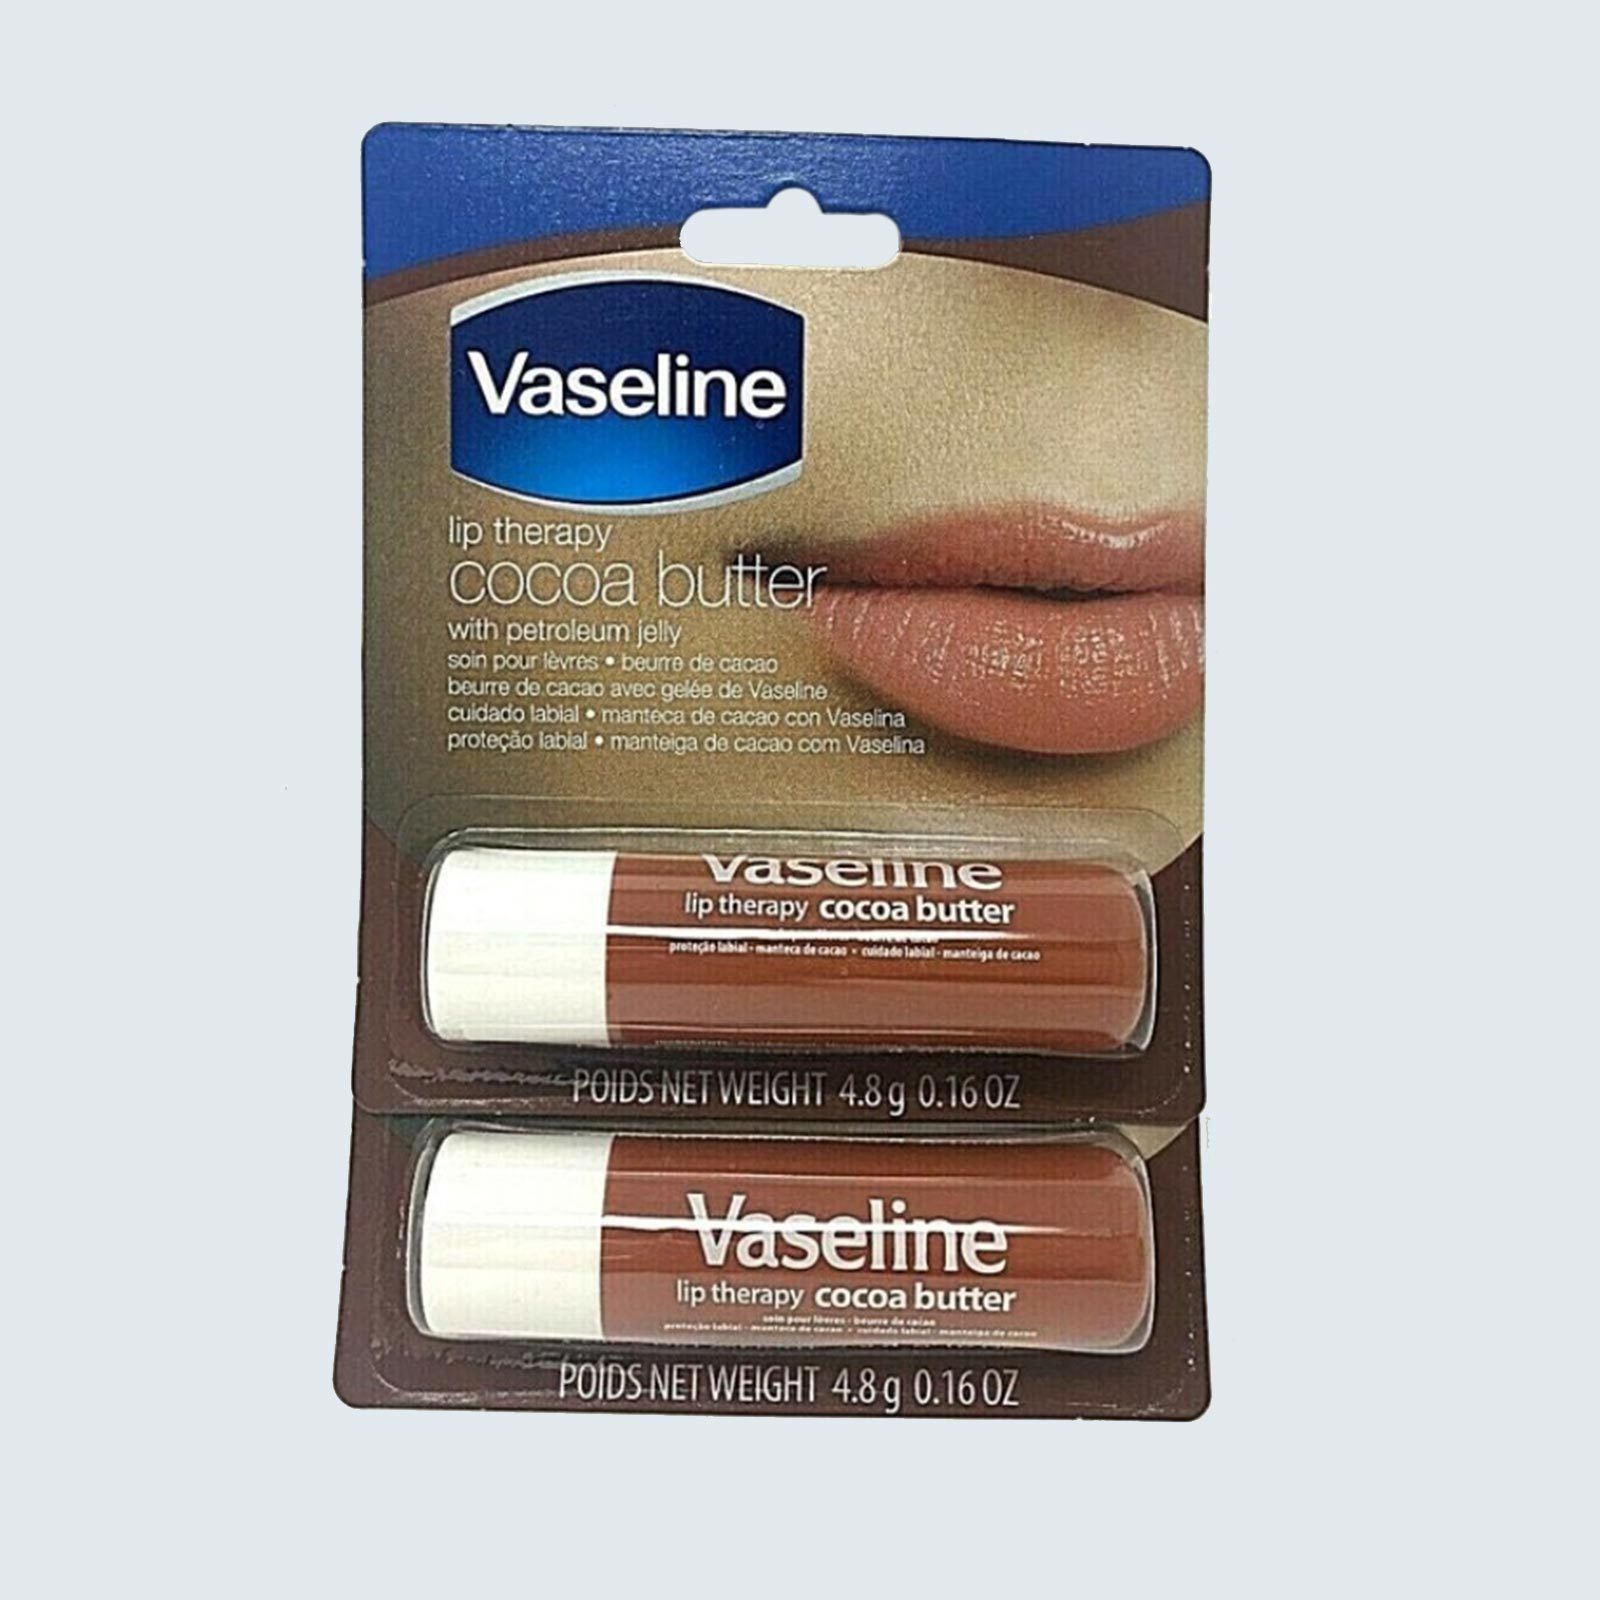 Vaseline Lip Therapy Cocoa Butter 2-Pack